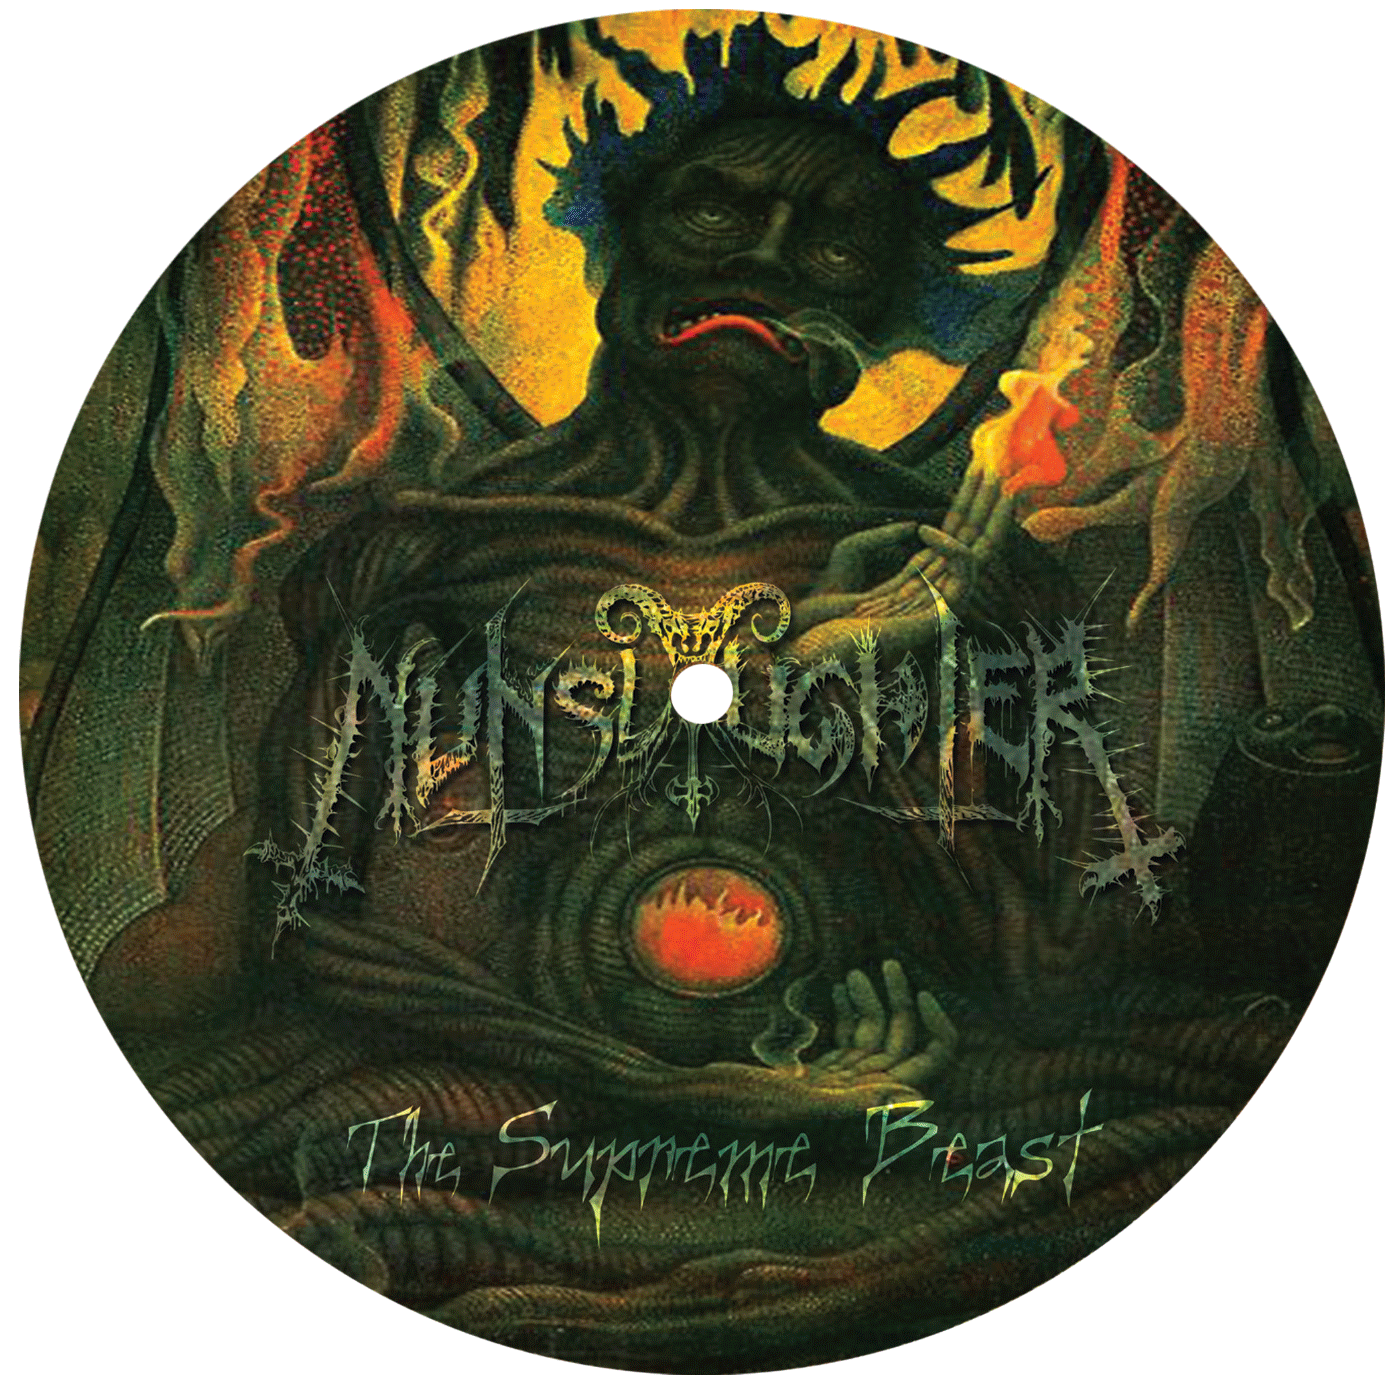 NUNSLAUGHTER – “THE SUPREME BEAST” PICTURE DISC 7”